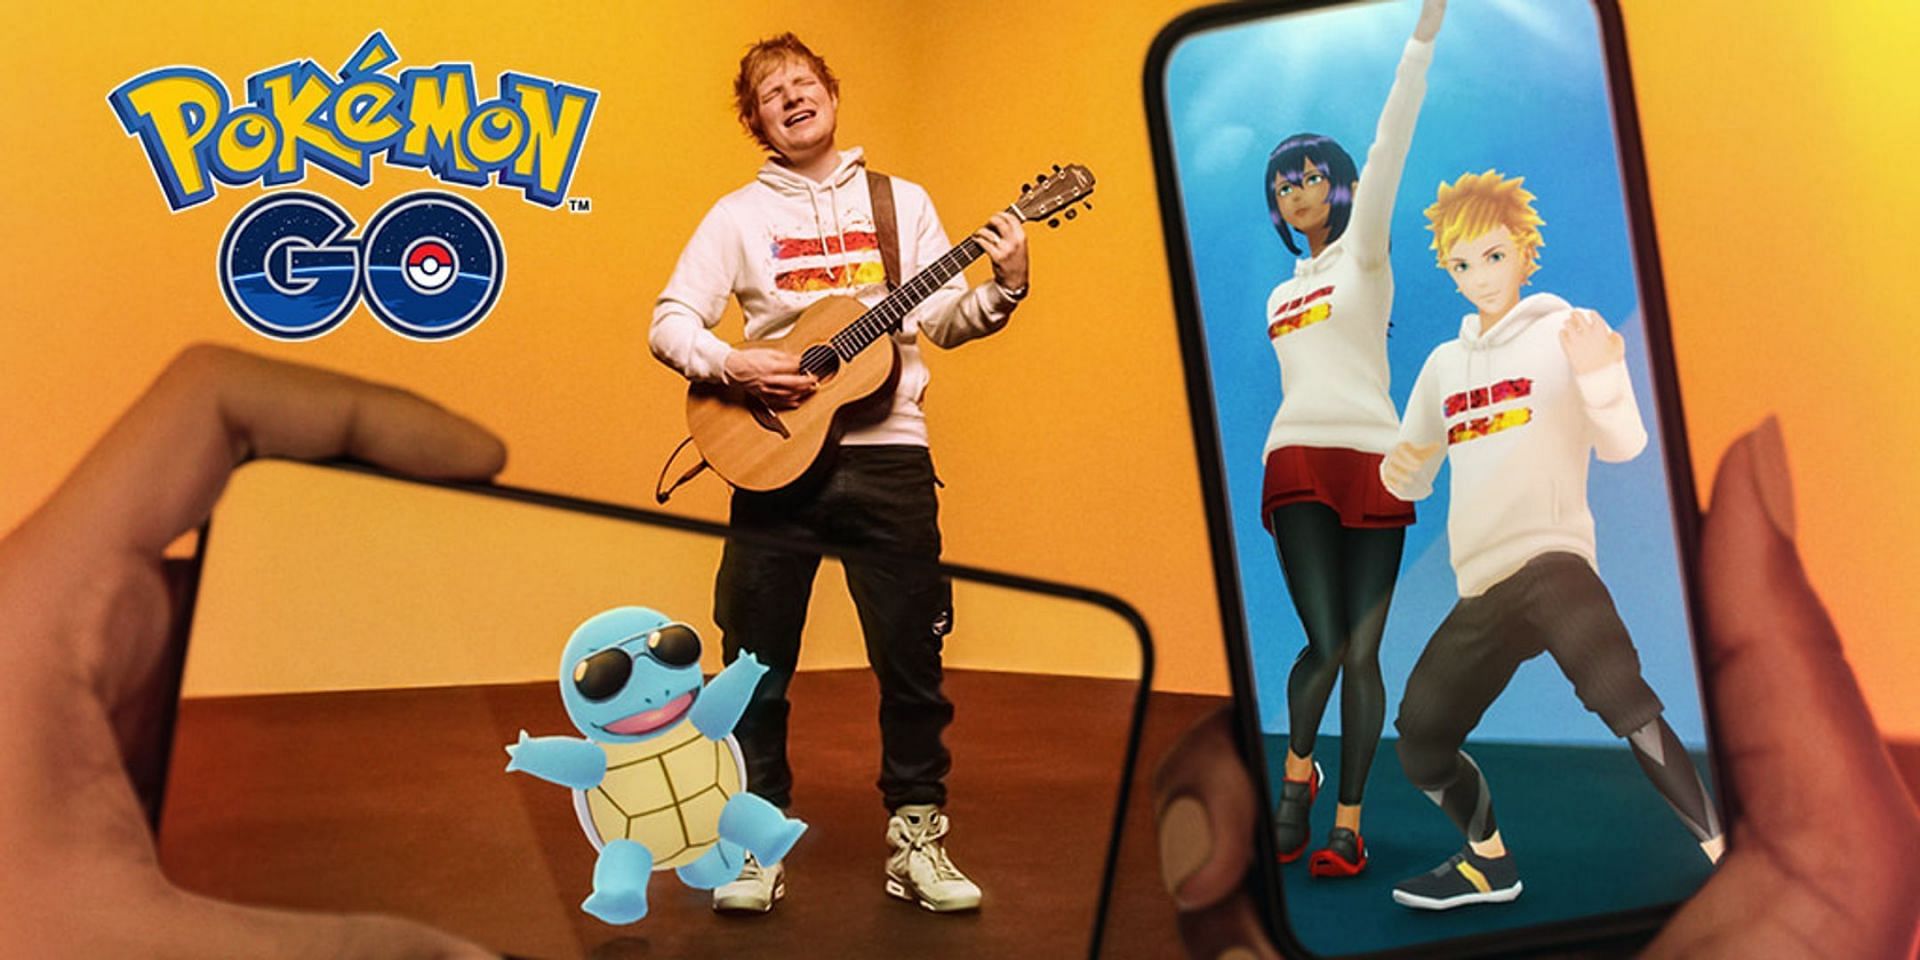 Promotional Imagery for the Ed Sheeran Collaboration event in Pokemon GO (Image via Niantic)